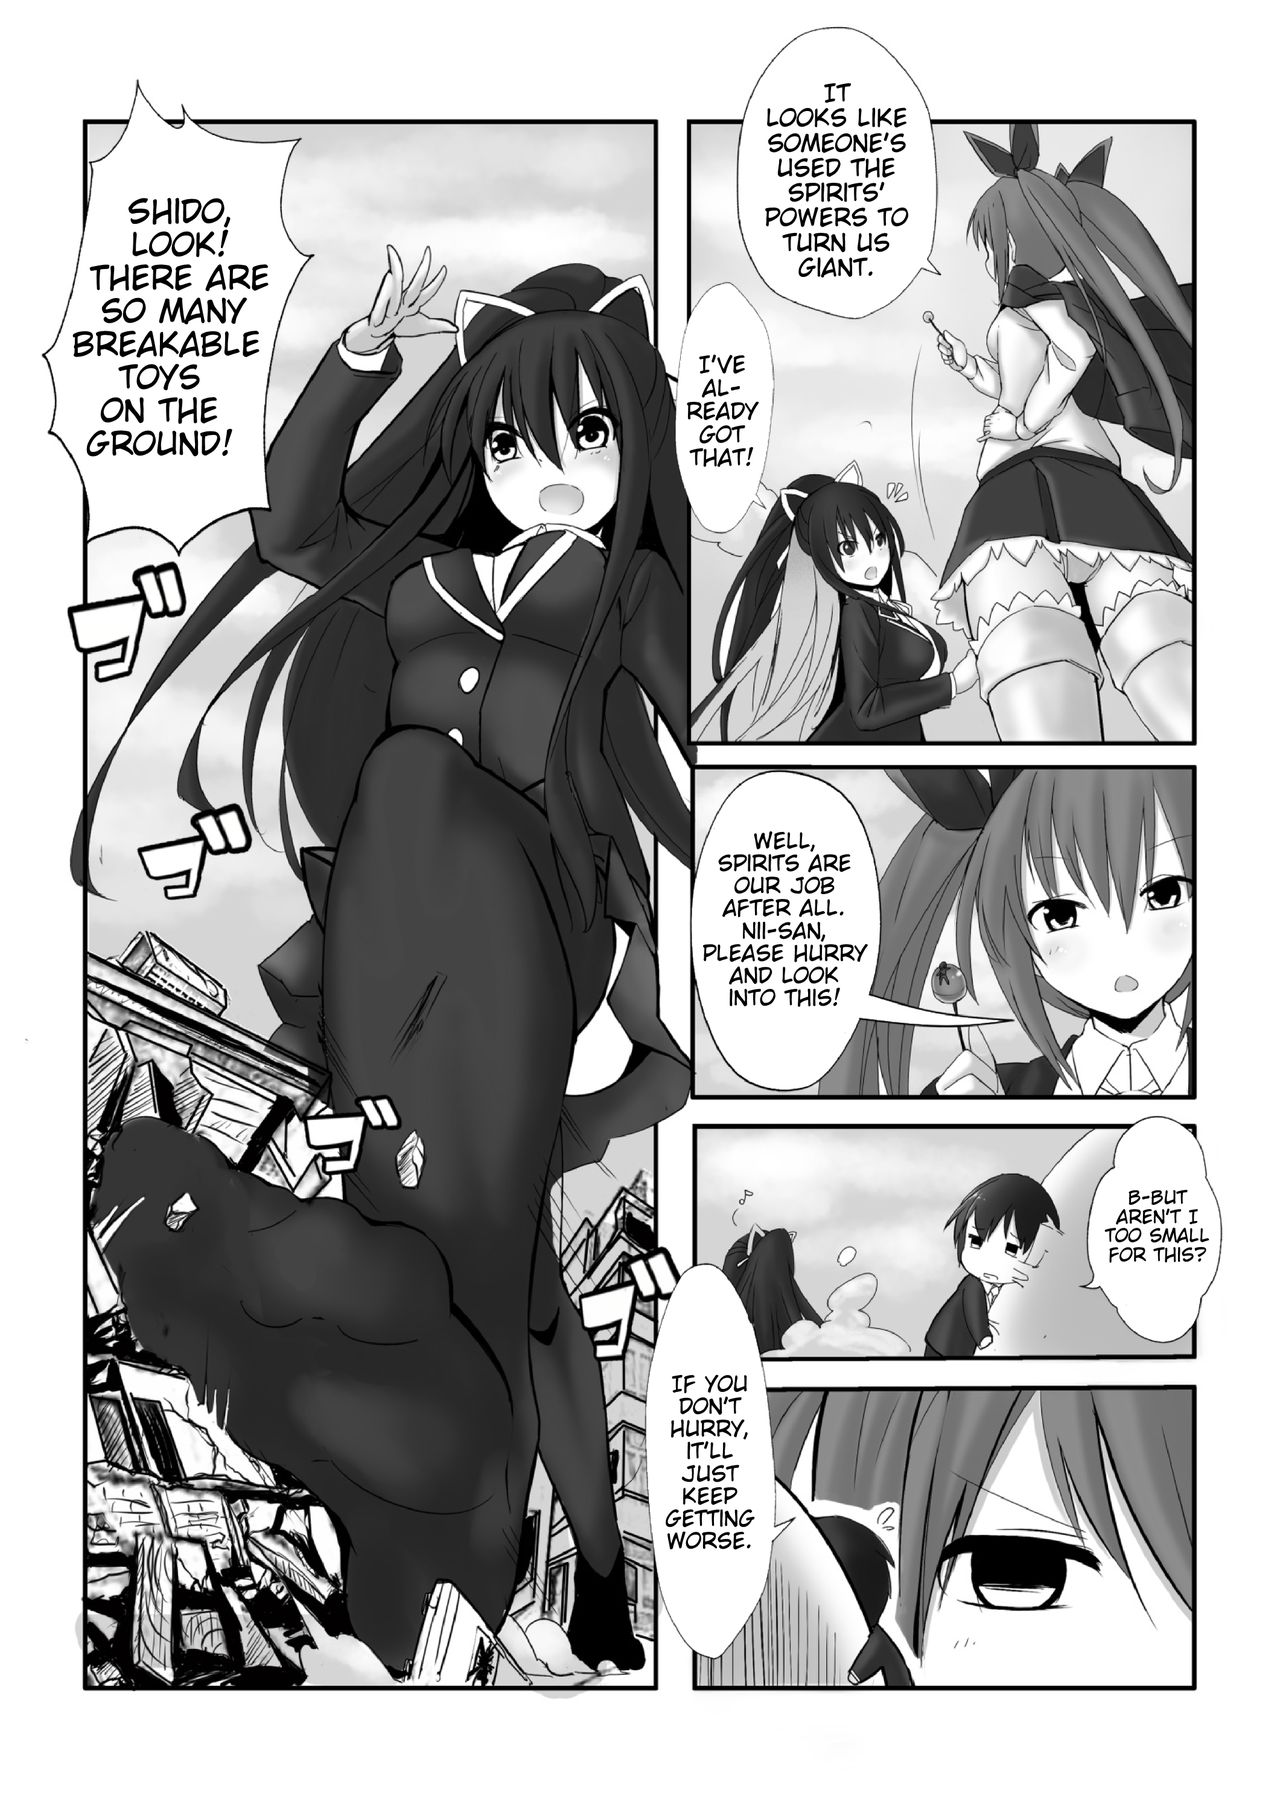 [Kazan no You] Date a Titaness (Date A Live) [English] {doujin-moe.us} [火山の楊] DATE A TITANESS (デート・ア・ライブ) [英訳]